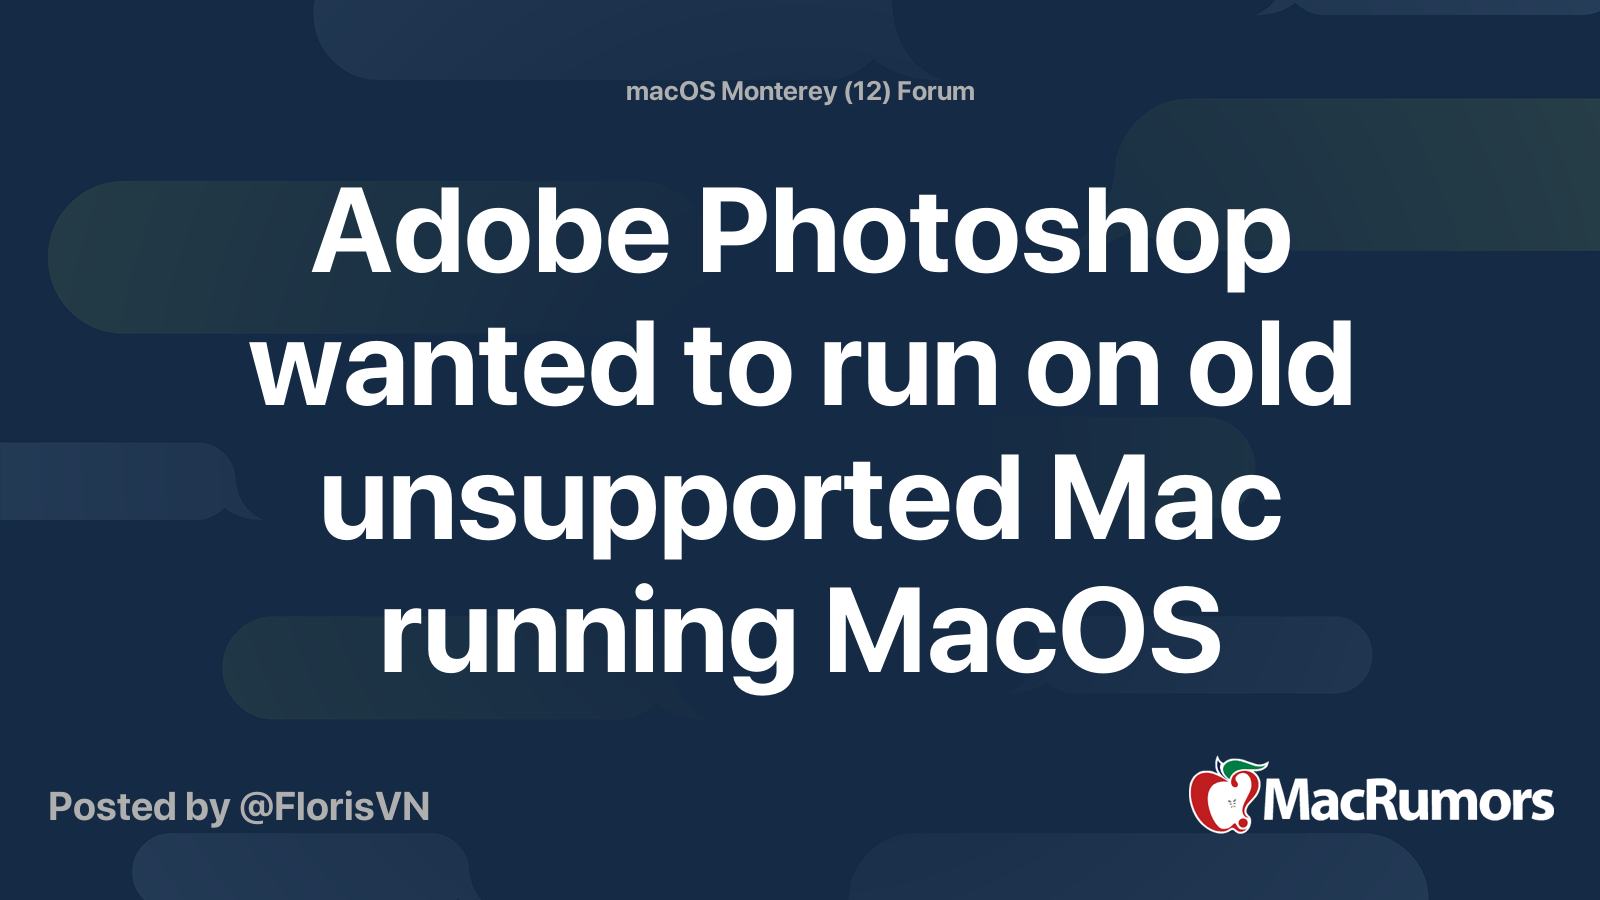 Adobe Photoshop wanted to run on old unsupported Mac running MacOS